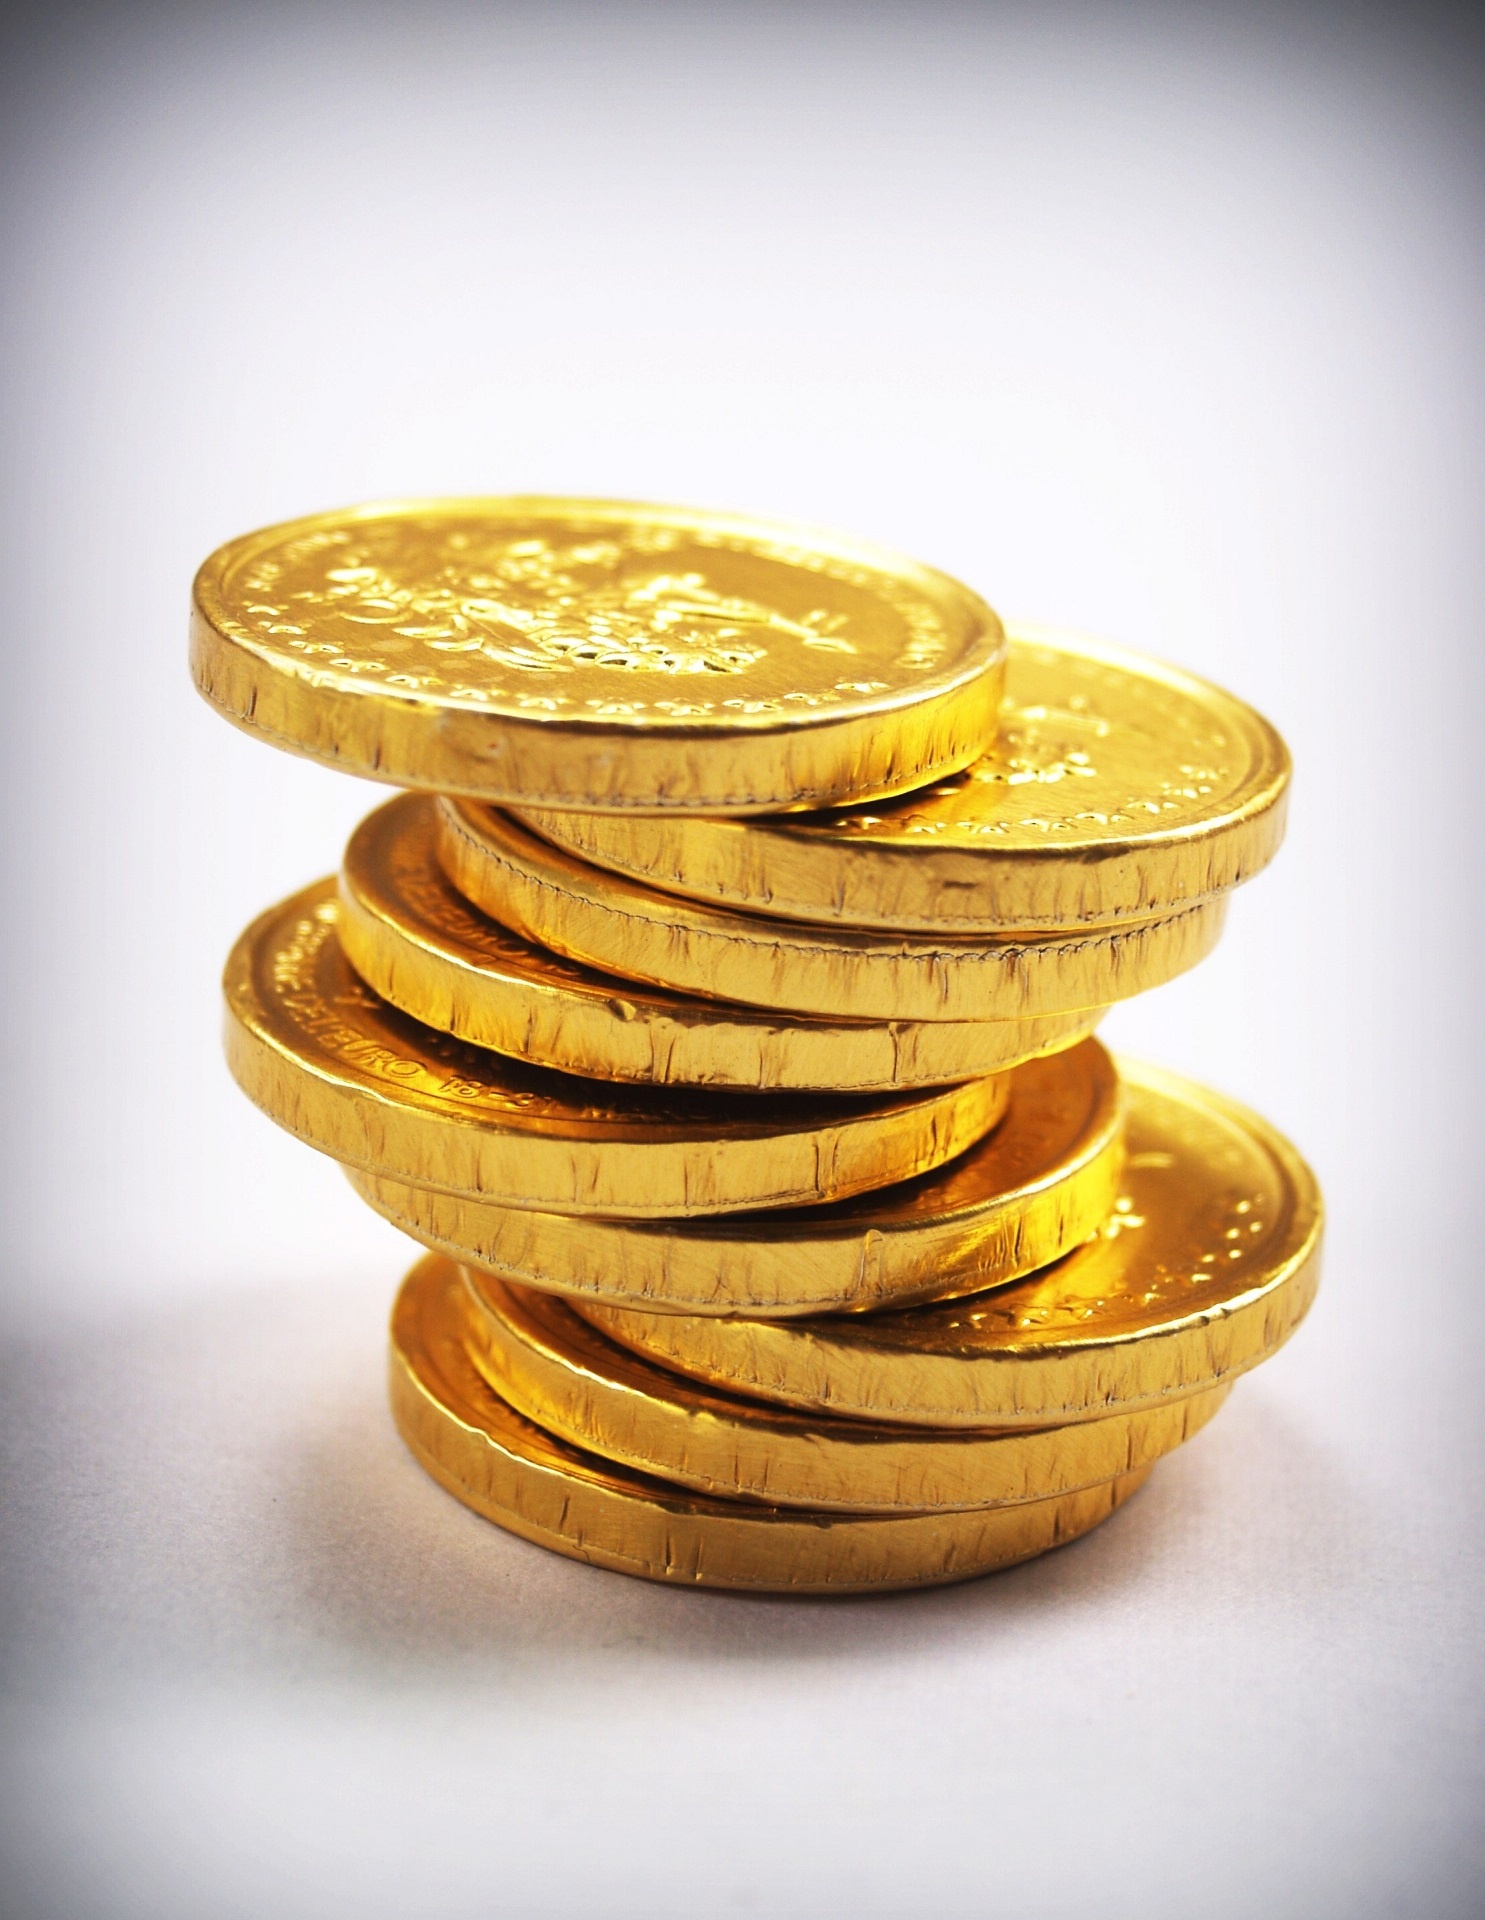 Gold Coins Free Stock Photo - Public Domain Pictures